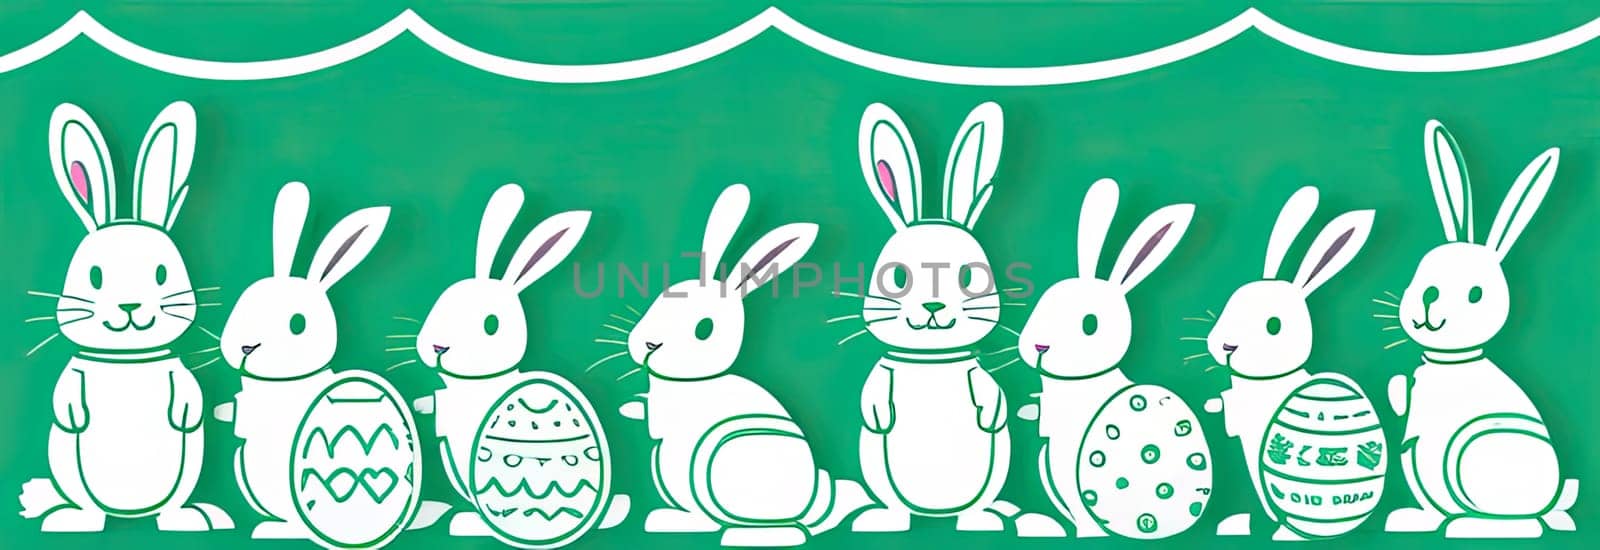 Holiday celebration banner of cute Easter decorated eggs cute Easter bunnys. Illustration of Easter rabbits, eggs on green background.Happy Easter greeting card, banner, festive background. Copy space